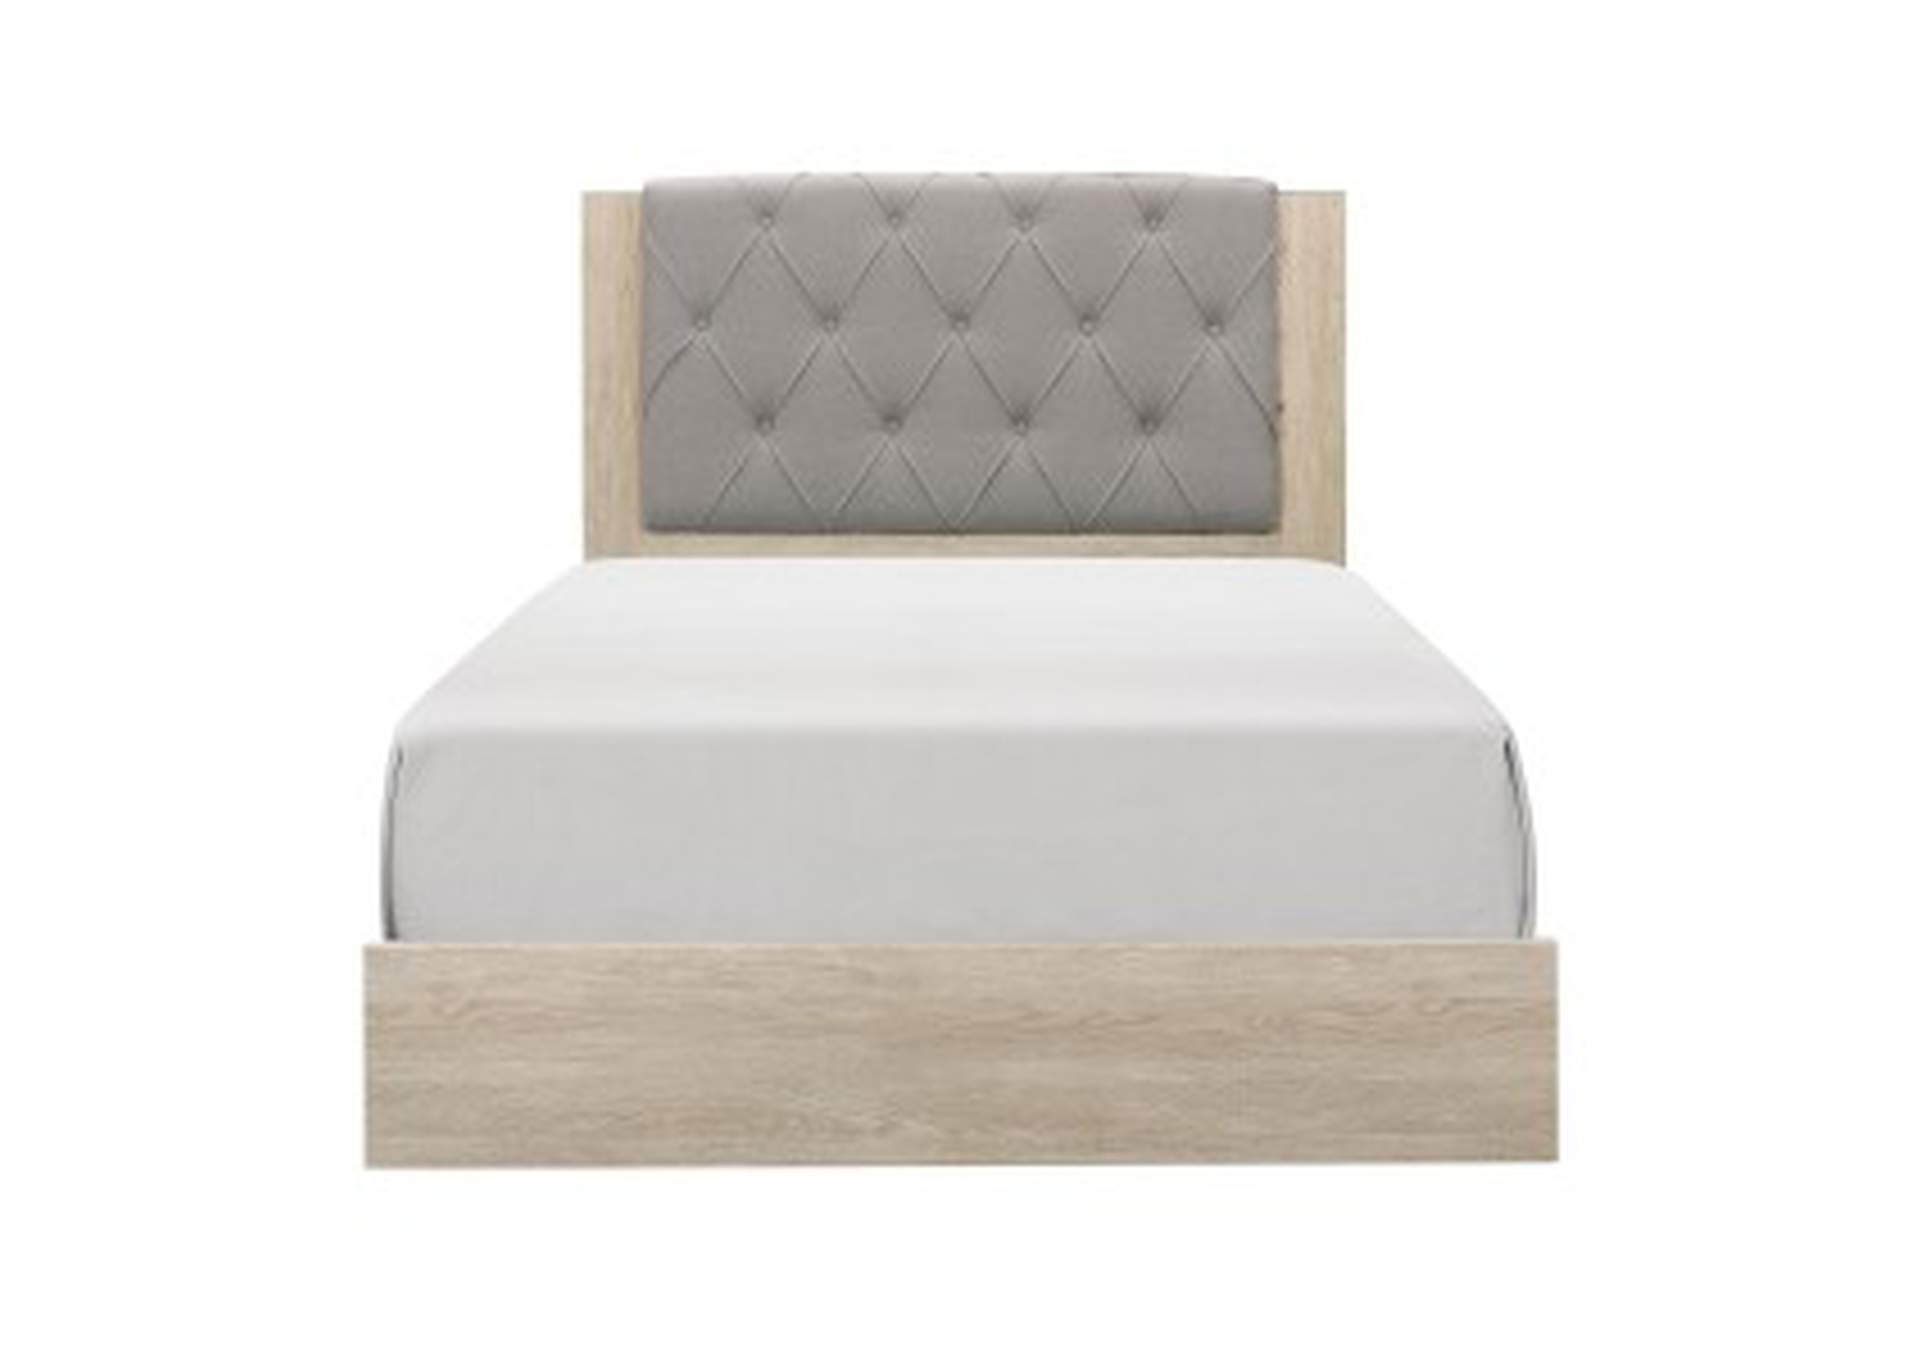 Whiting Queen Bed In A Box,Homelegance